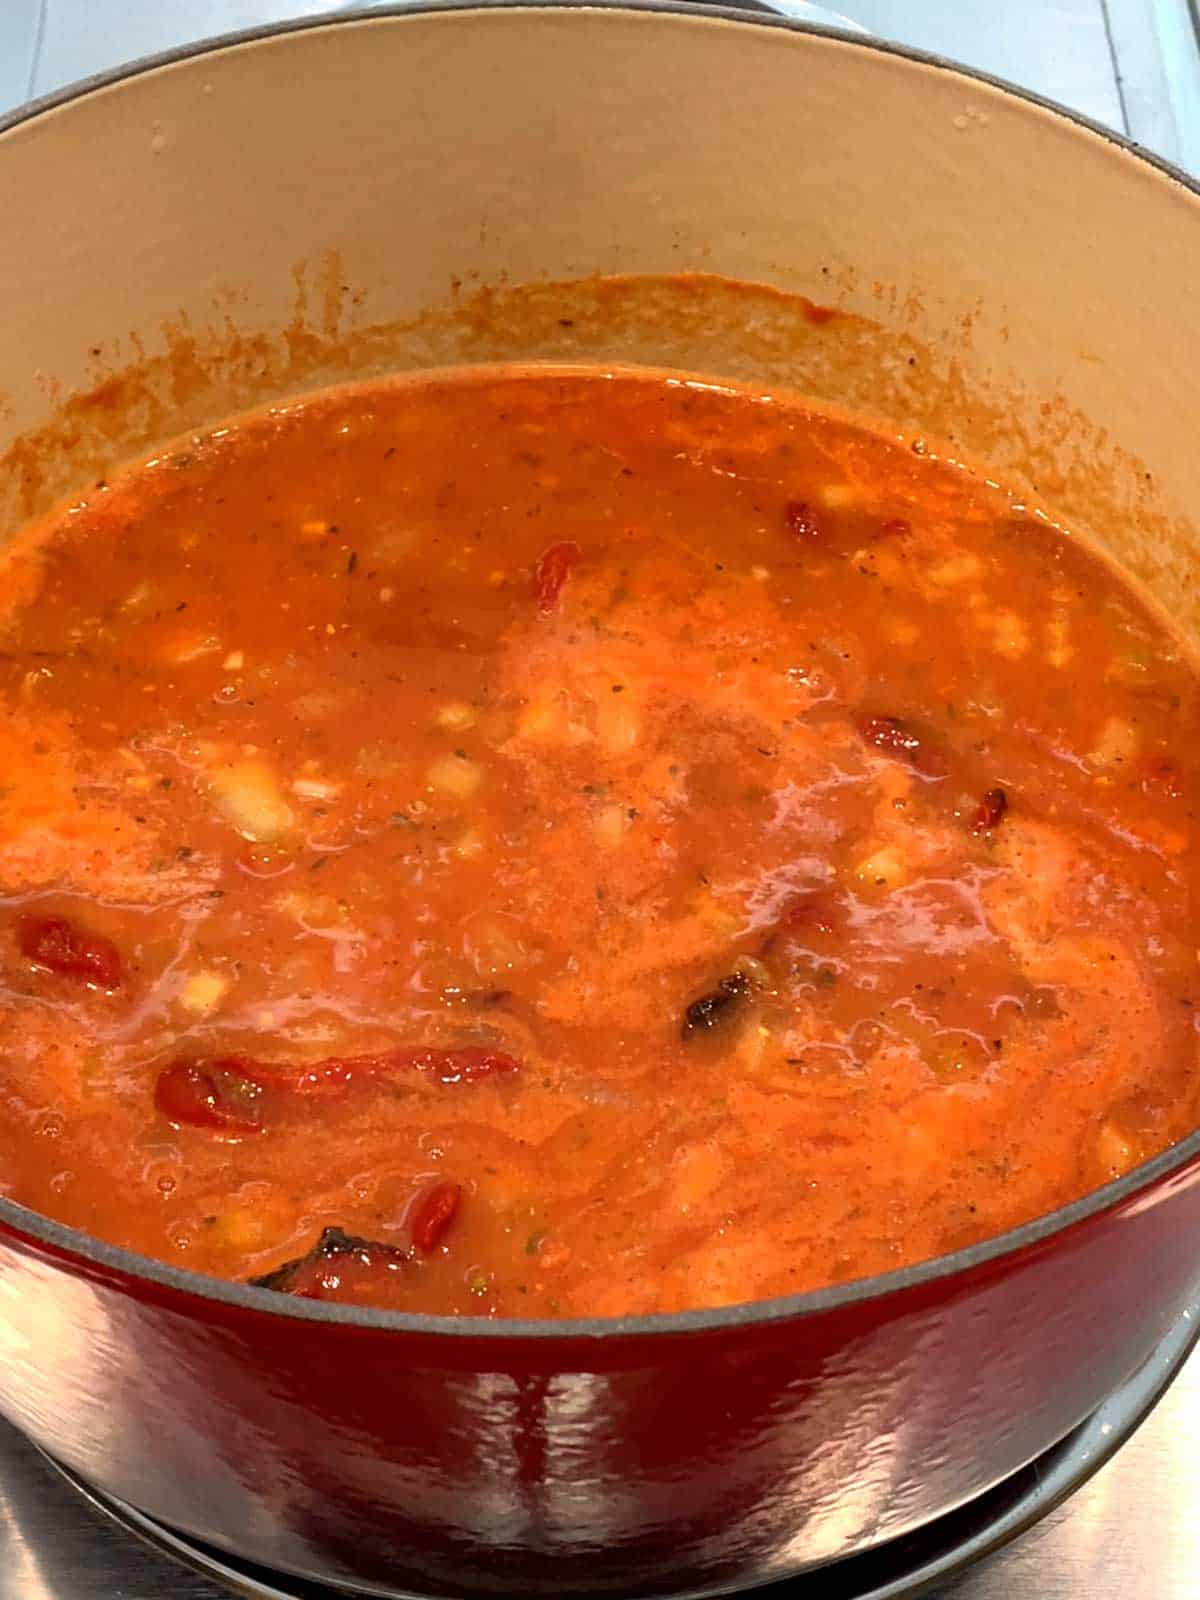 Roasted tomatoes added to soup